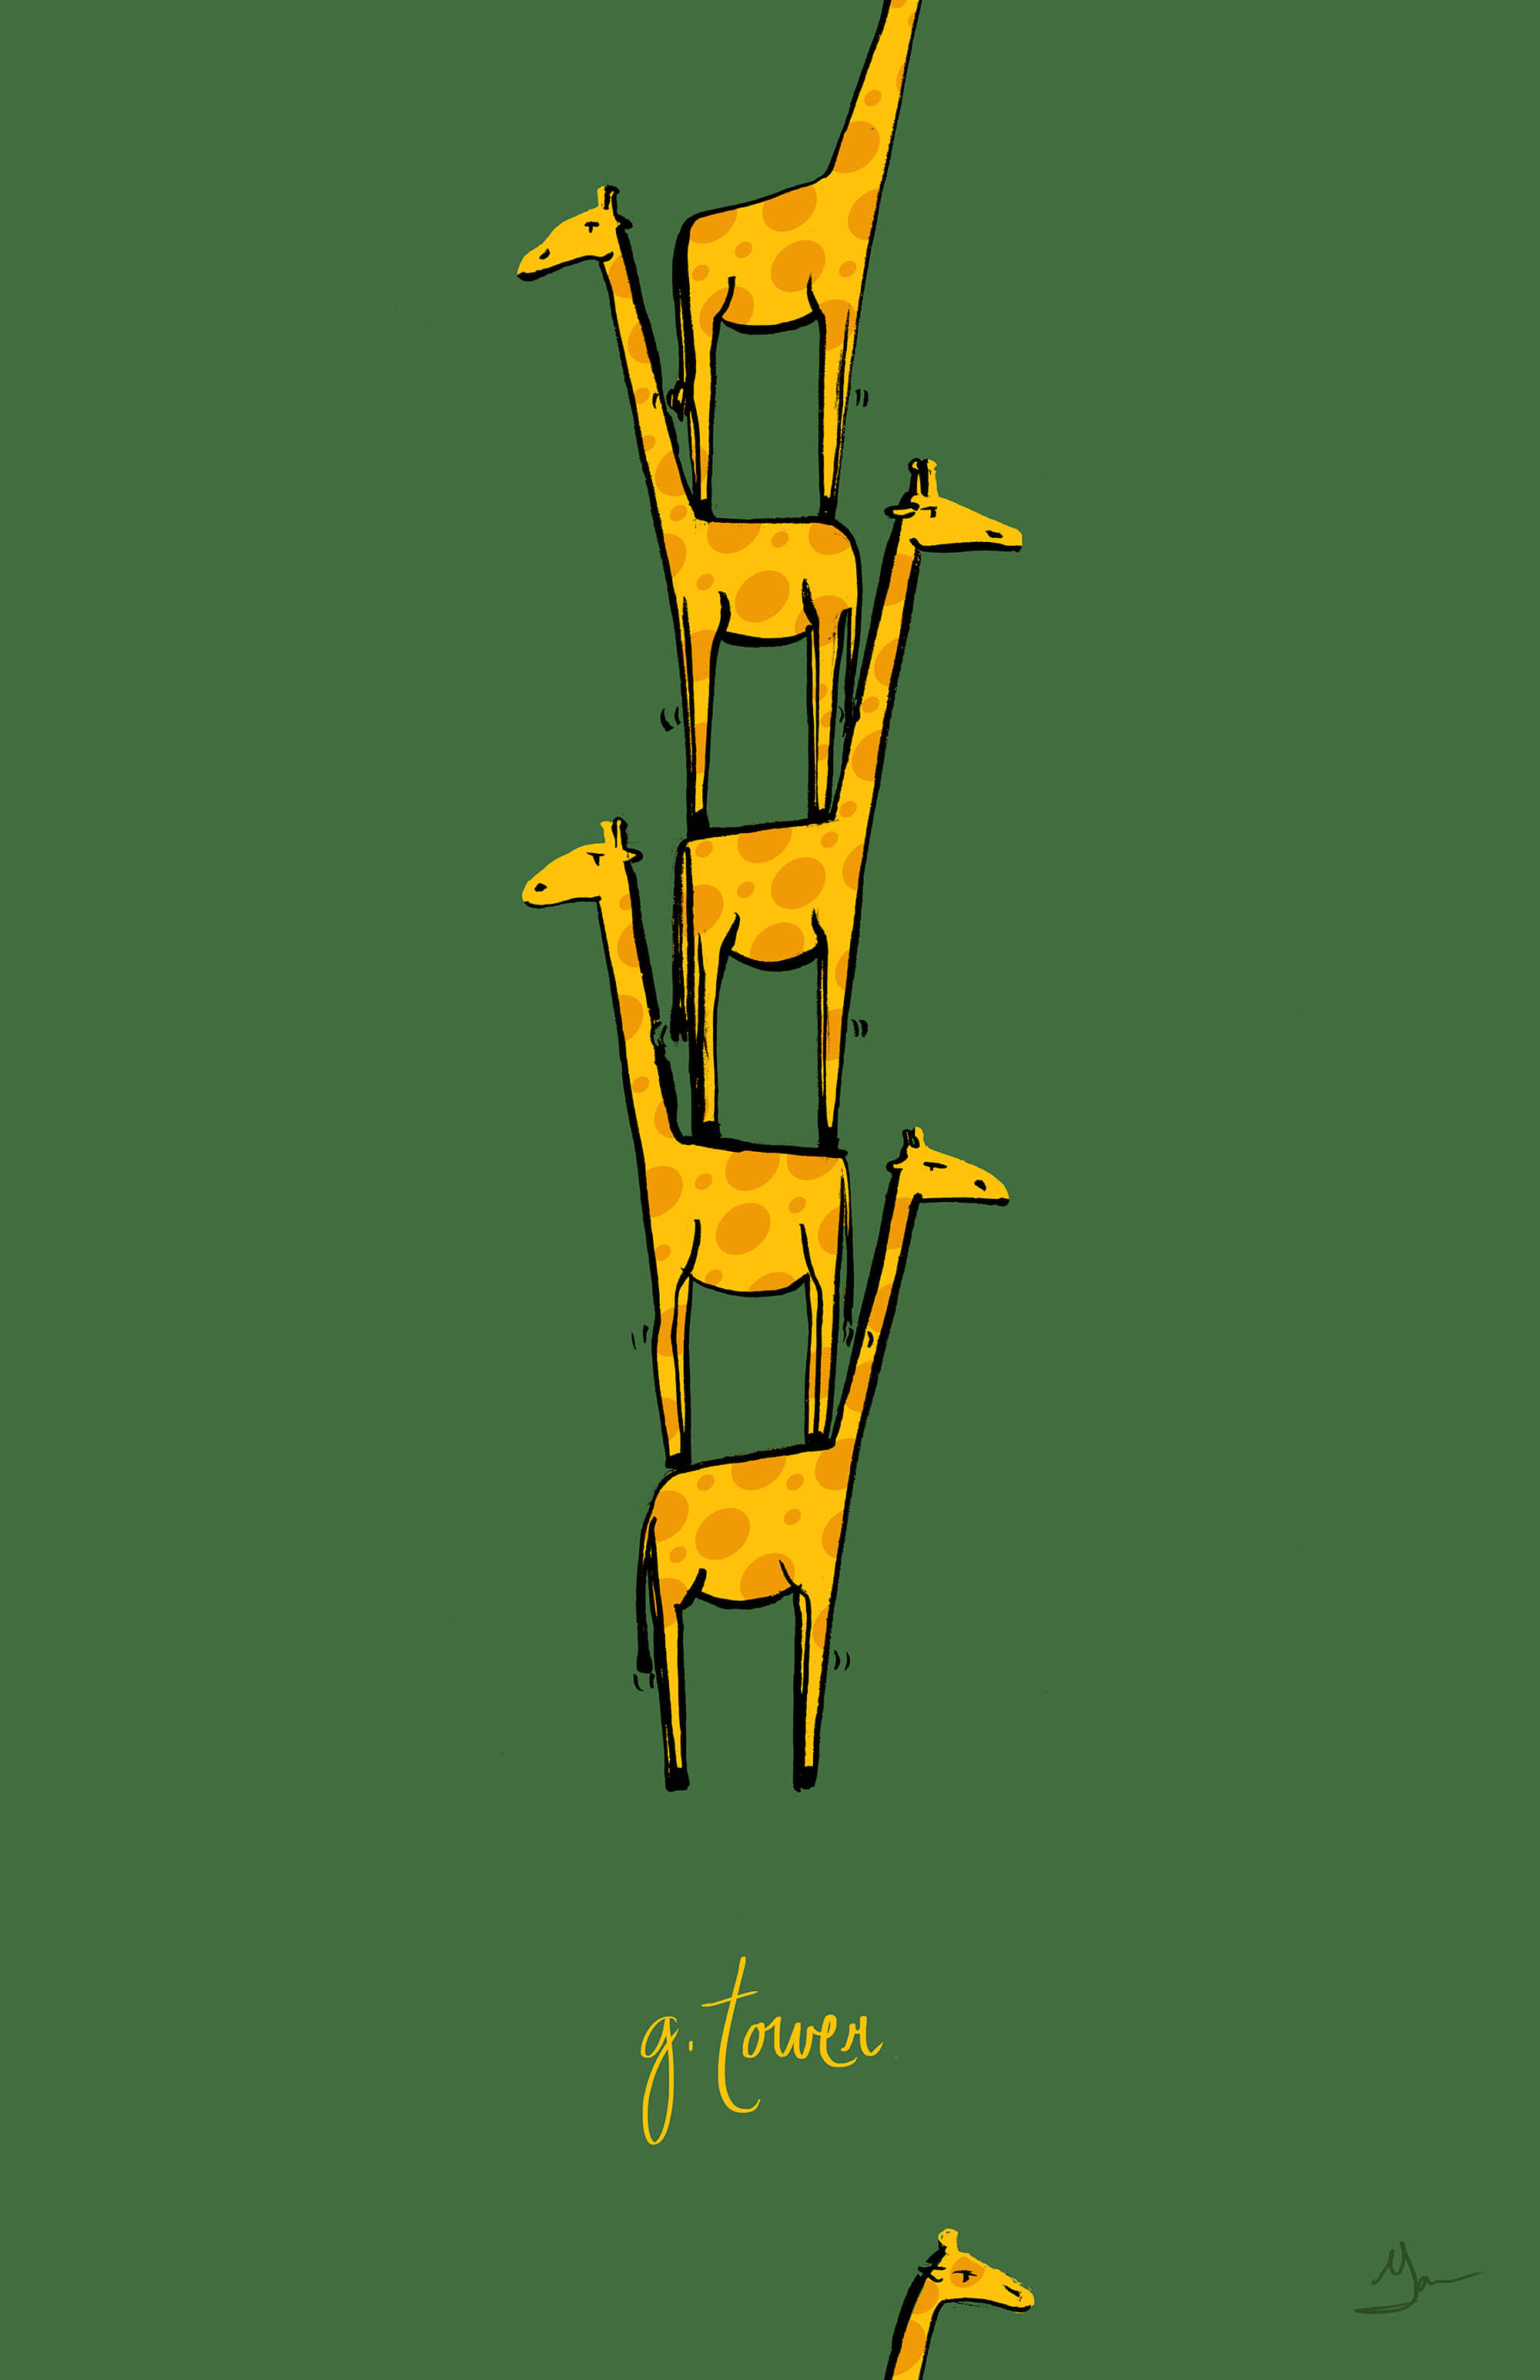 Giraffes standing on top of each others backs.